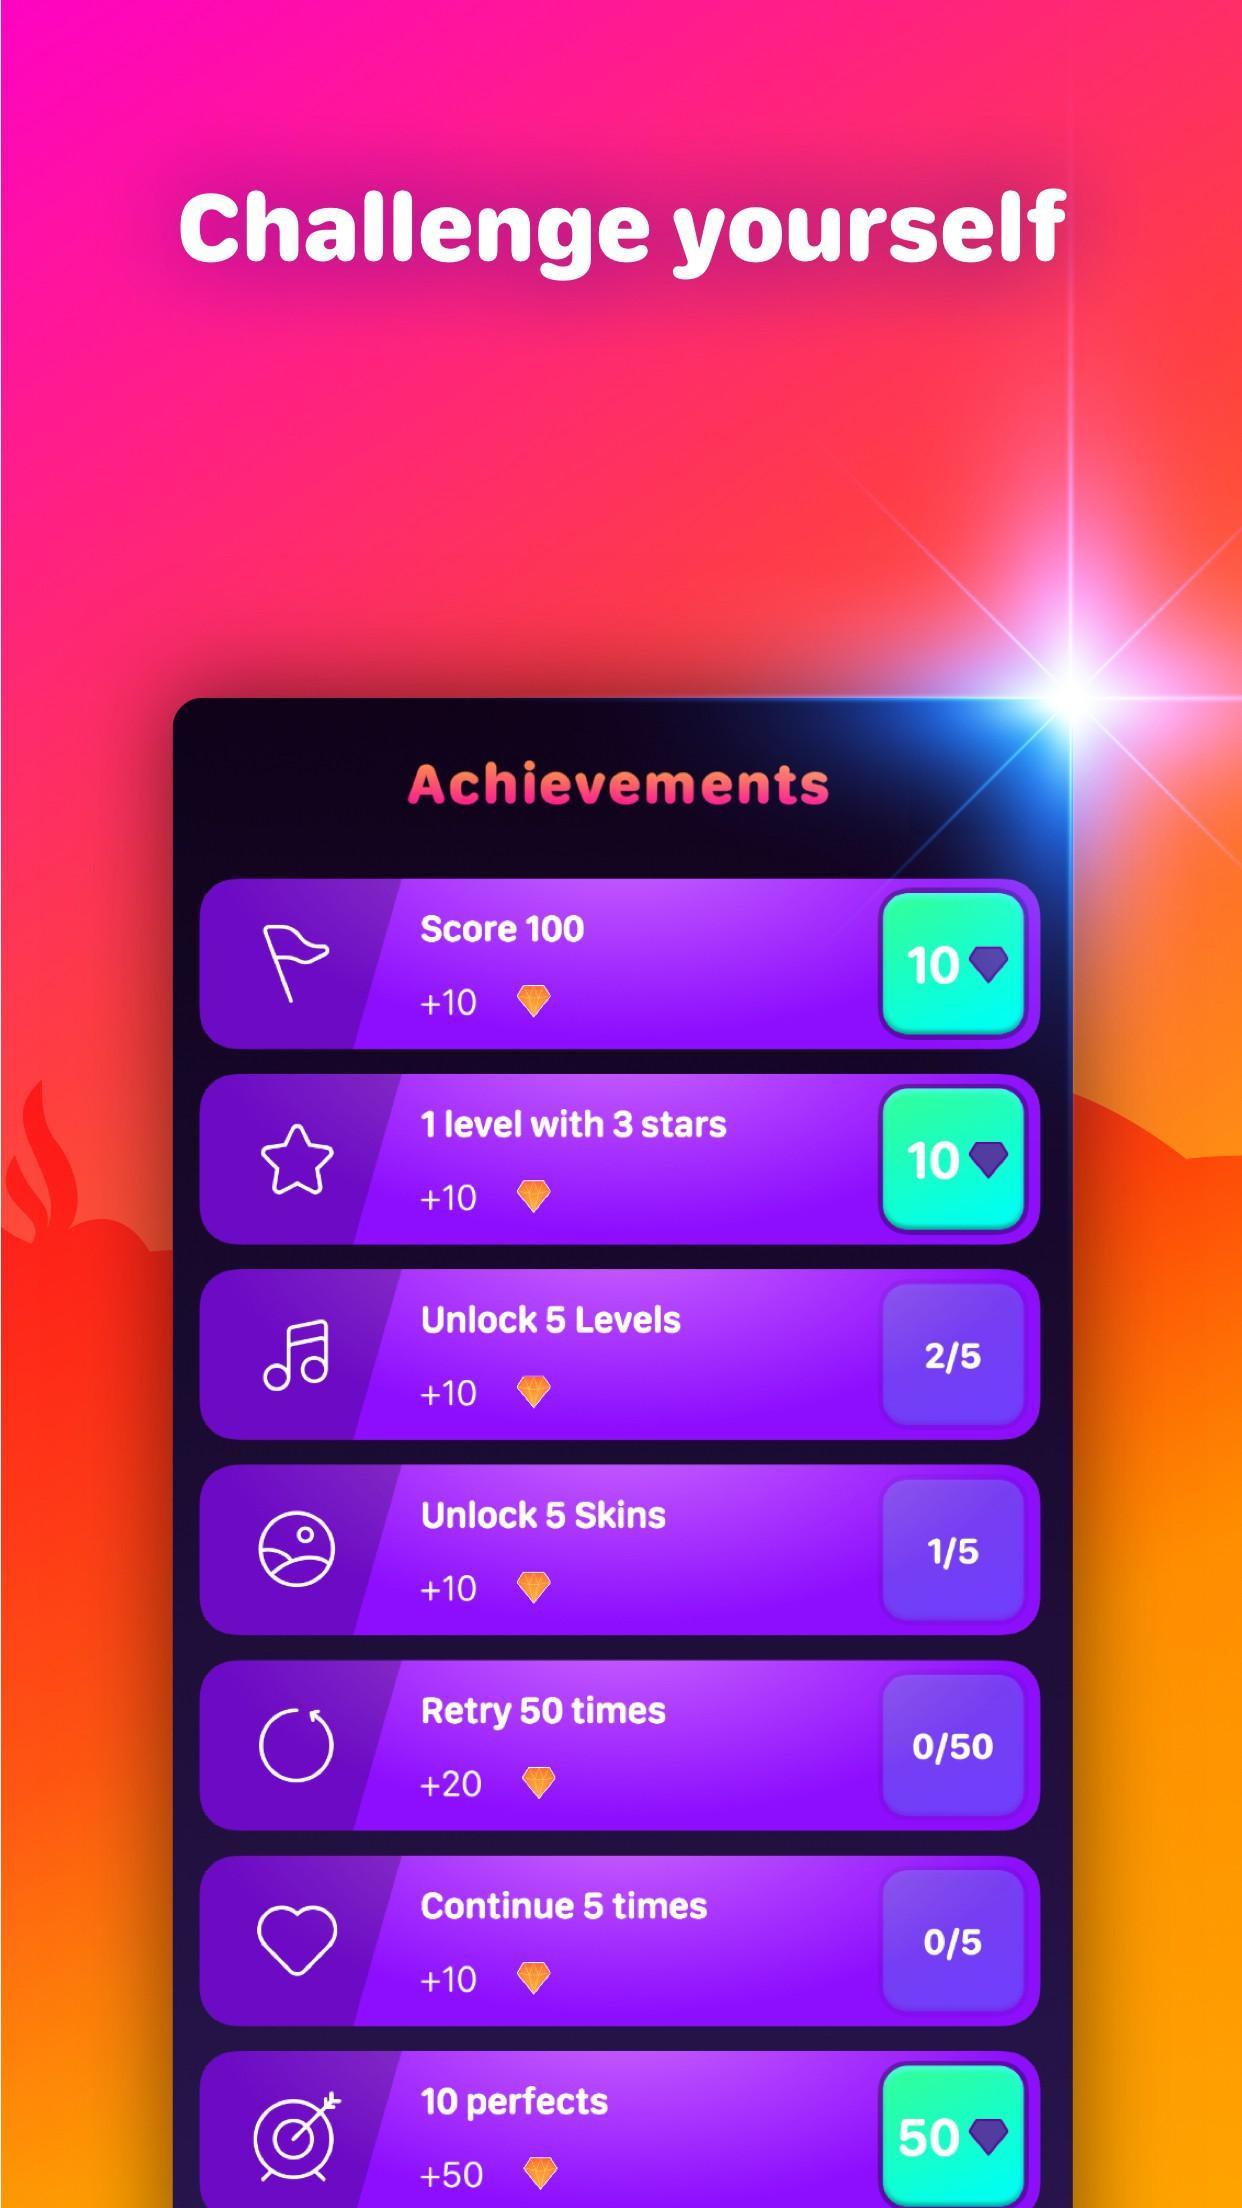 Piano Star: Tap Music Tiles APK para Android - Download